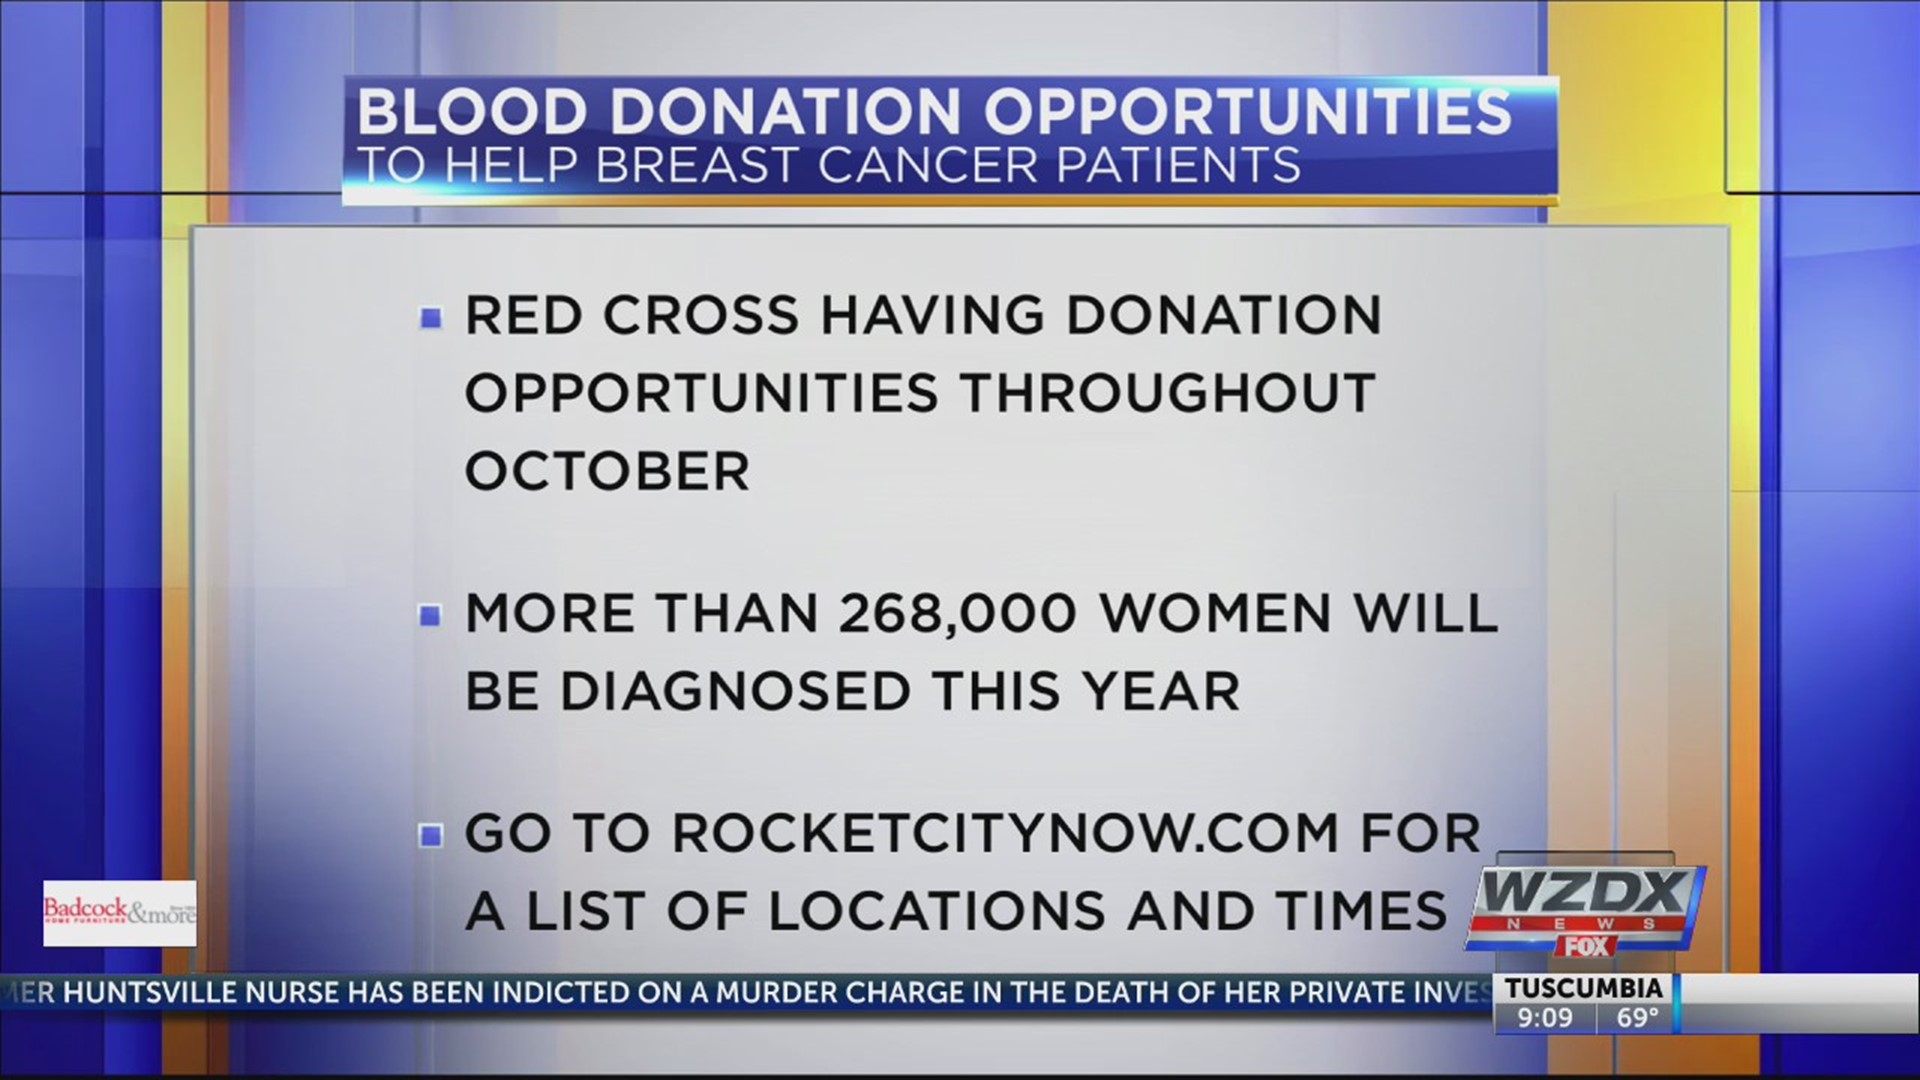 The Red Cross needs you to donate blood to help people fighting breast cancer.